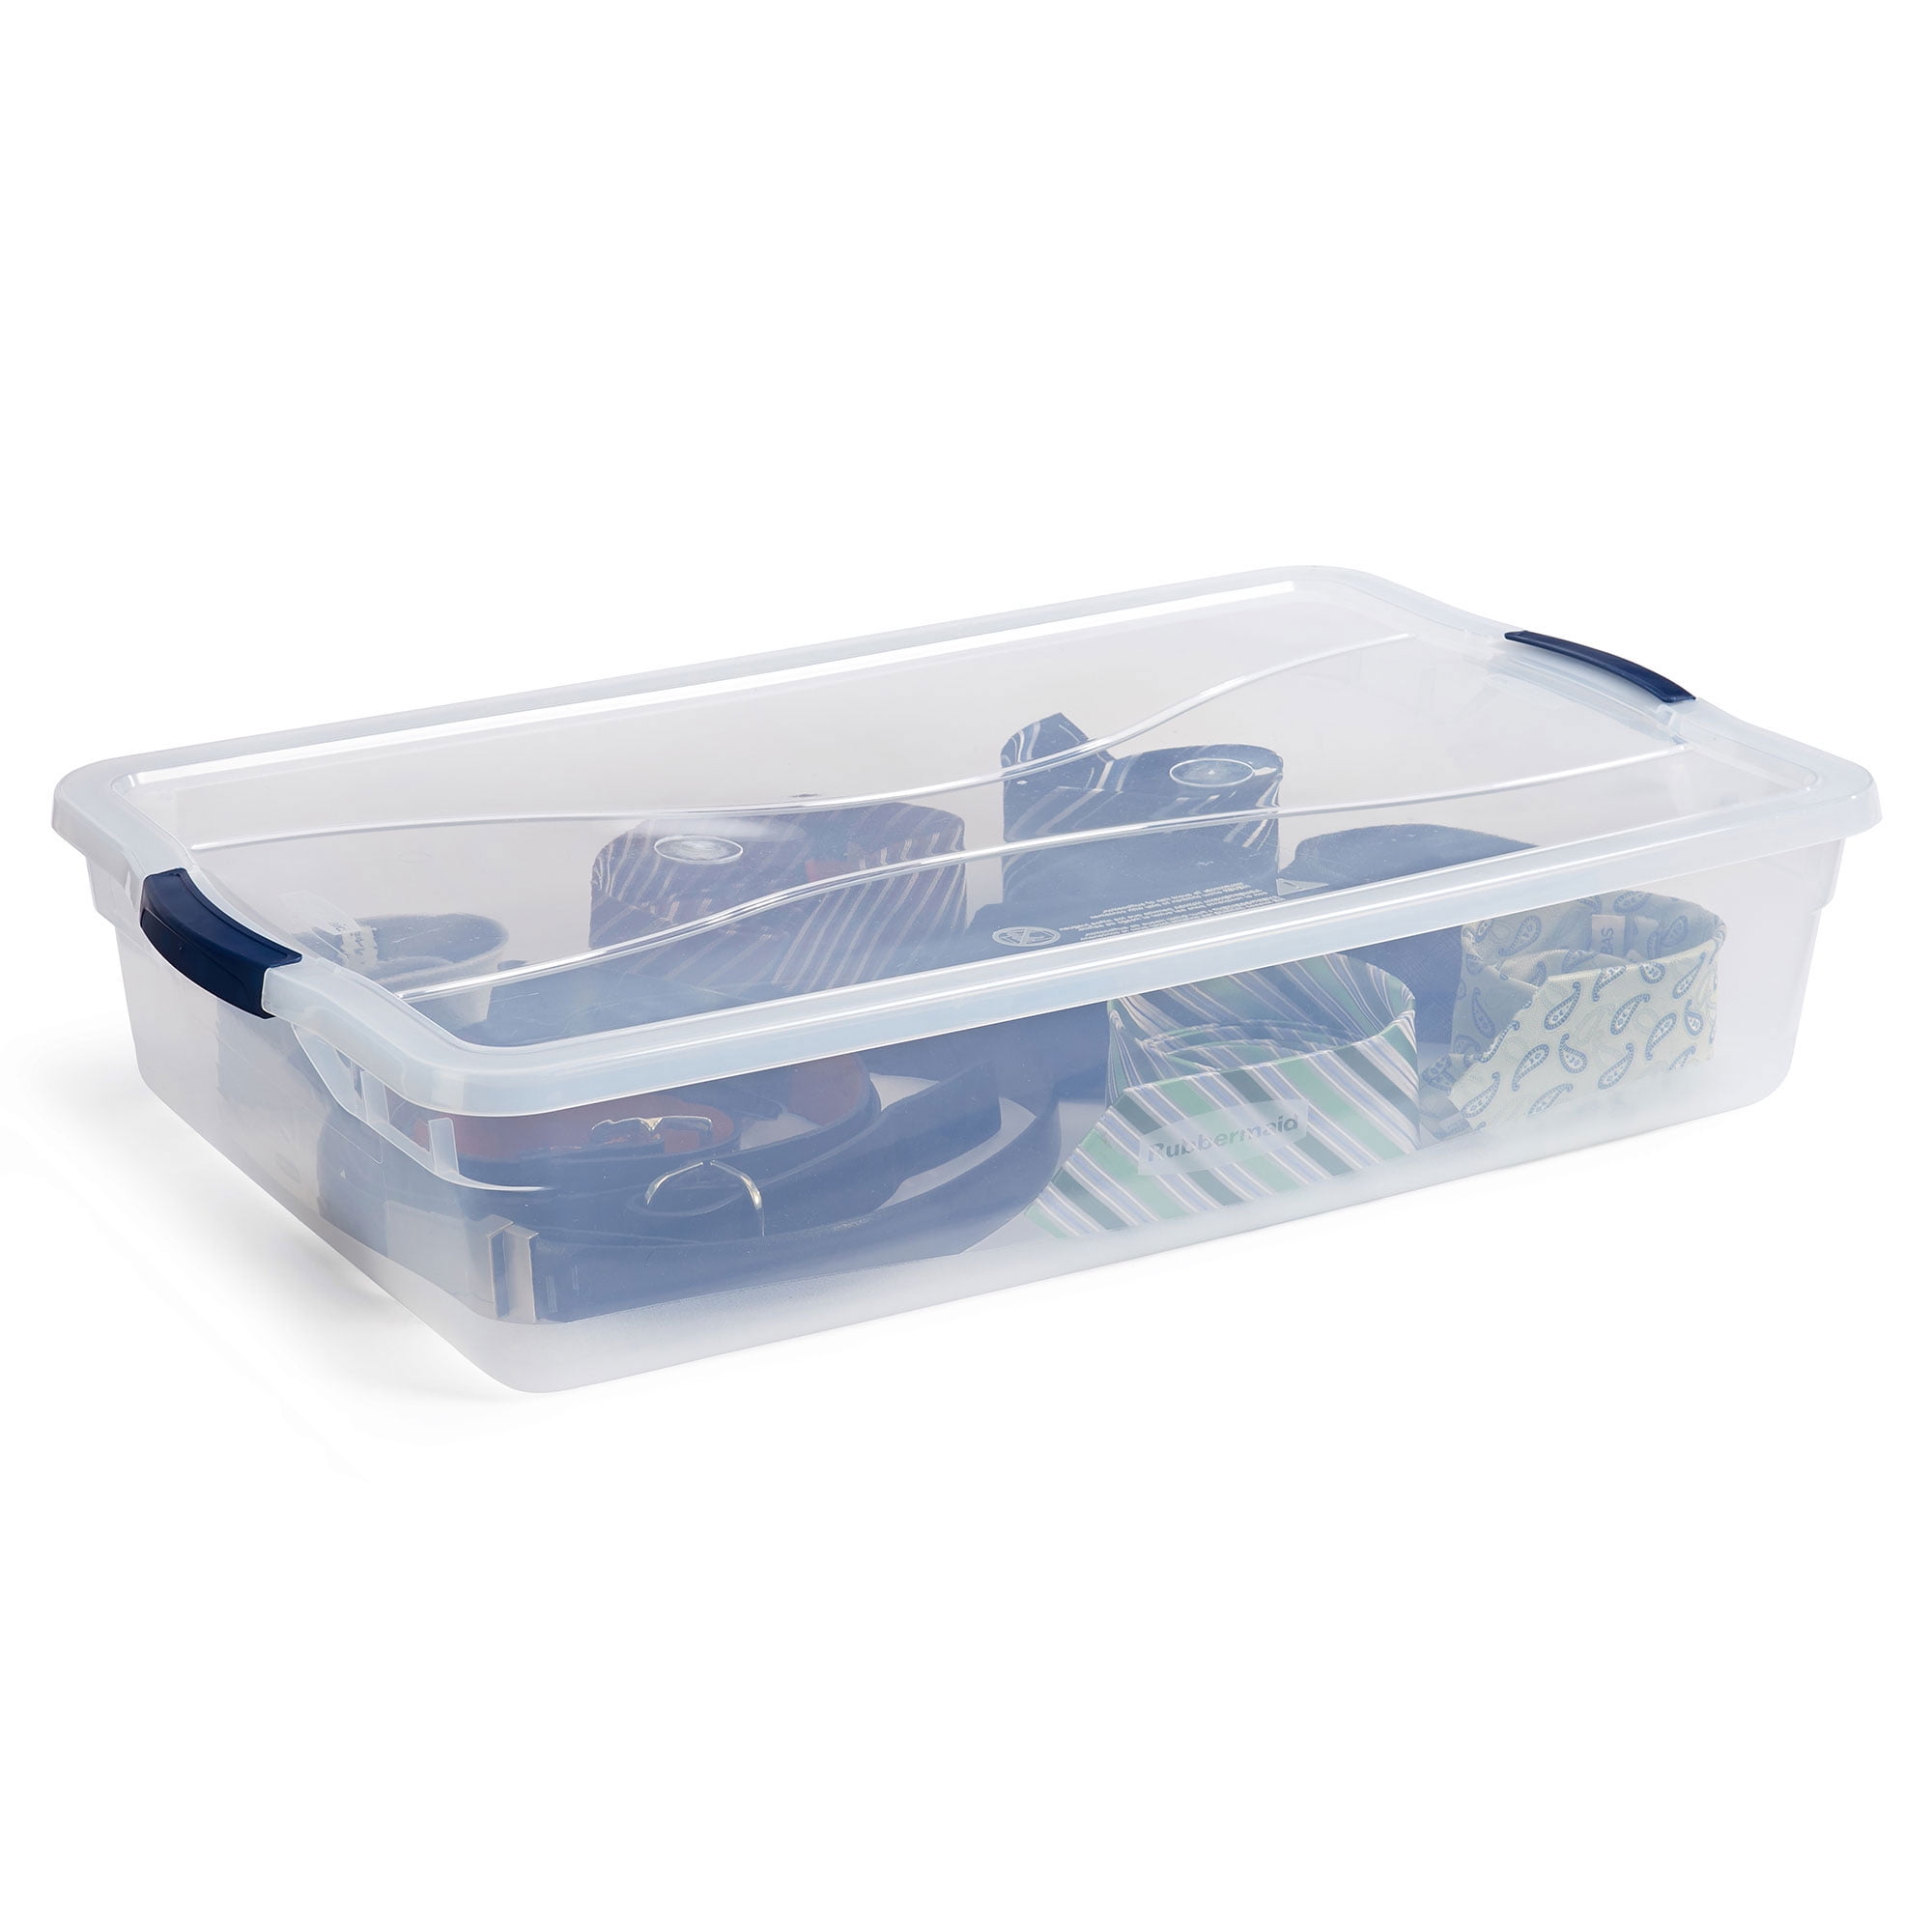 Rubbermaid Home RMCC410001 Clever Store Storage Container, Plastic, Clear  Blue, 29 Inch 18 Inch By 6 in H: Storage Totes 17 to 64 Quarts - To 120  Cubic Feet (051596410018-1)